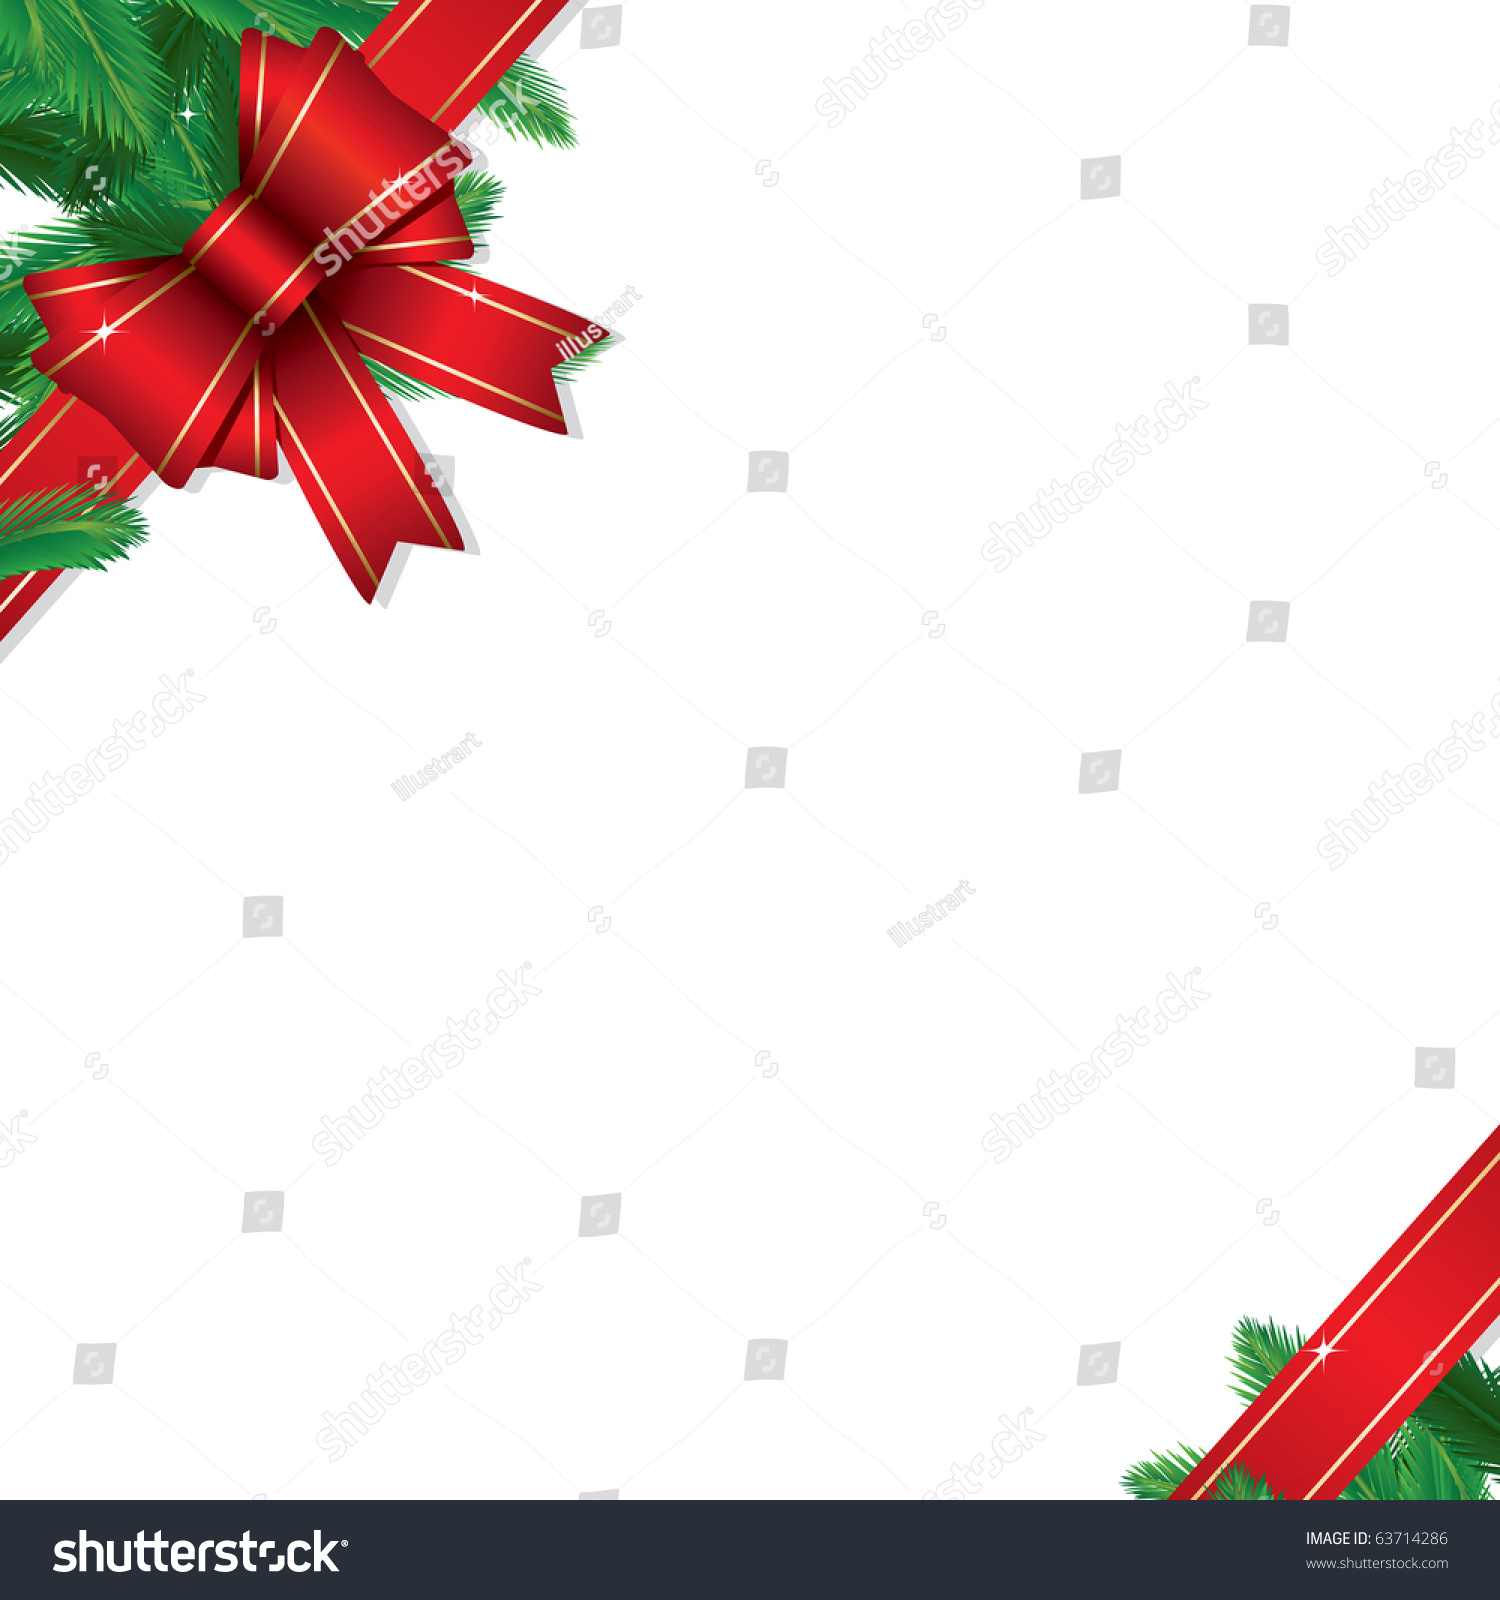 Christmas Gift Border (Also Available Jpeg Version Of This Image) Stock ...